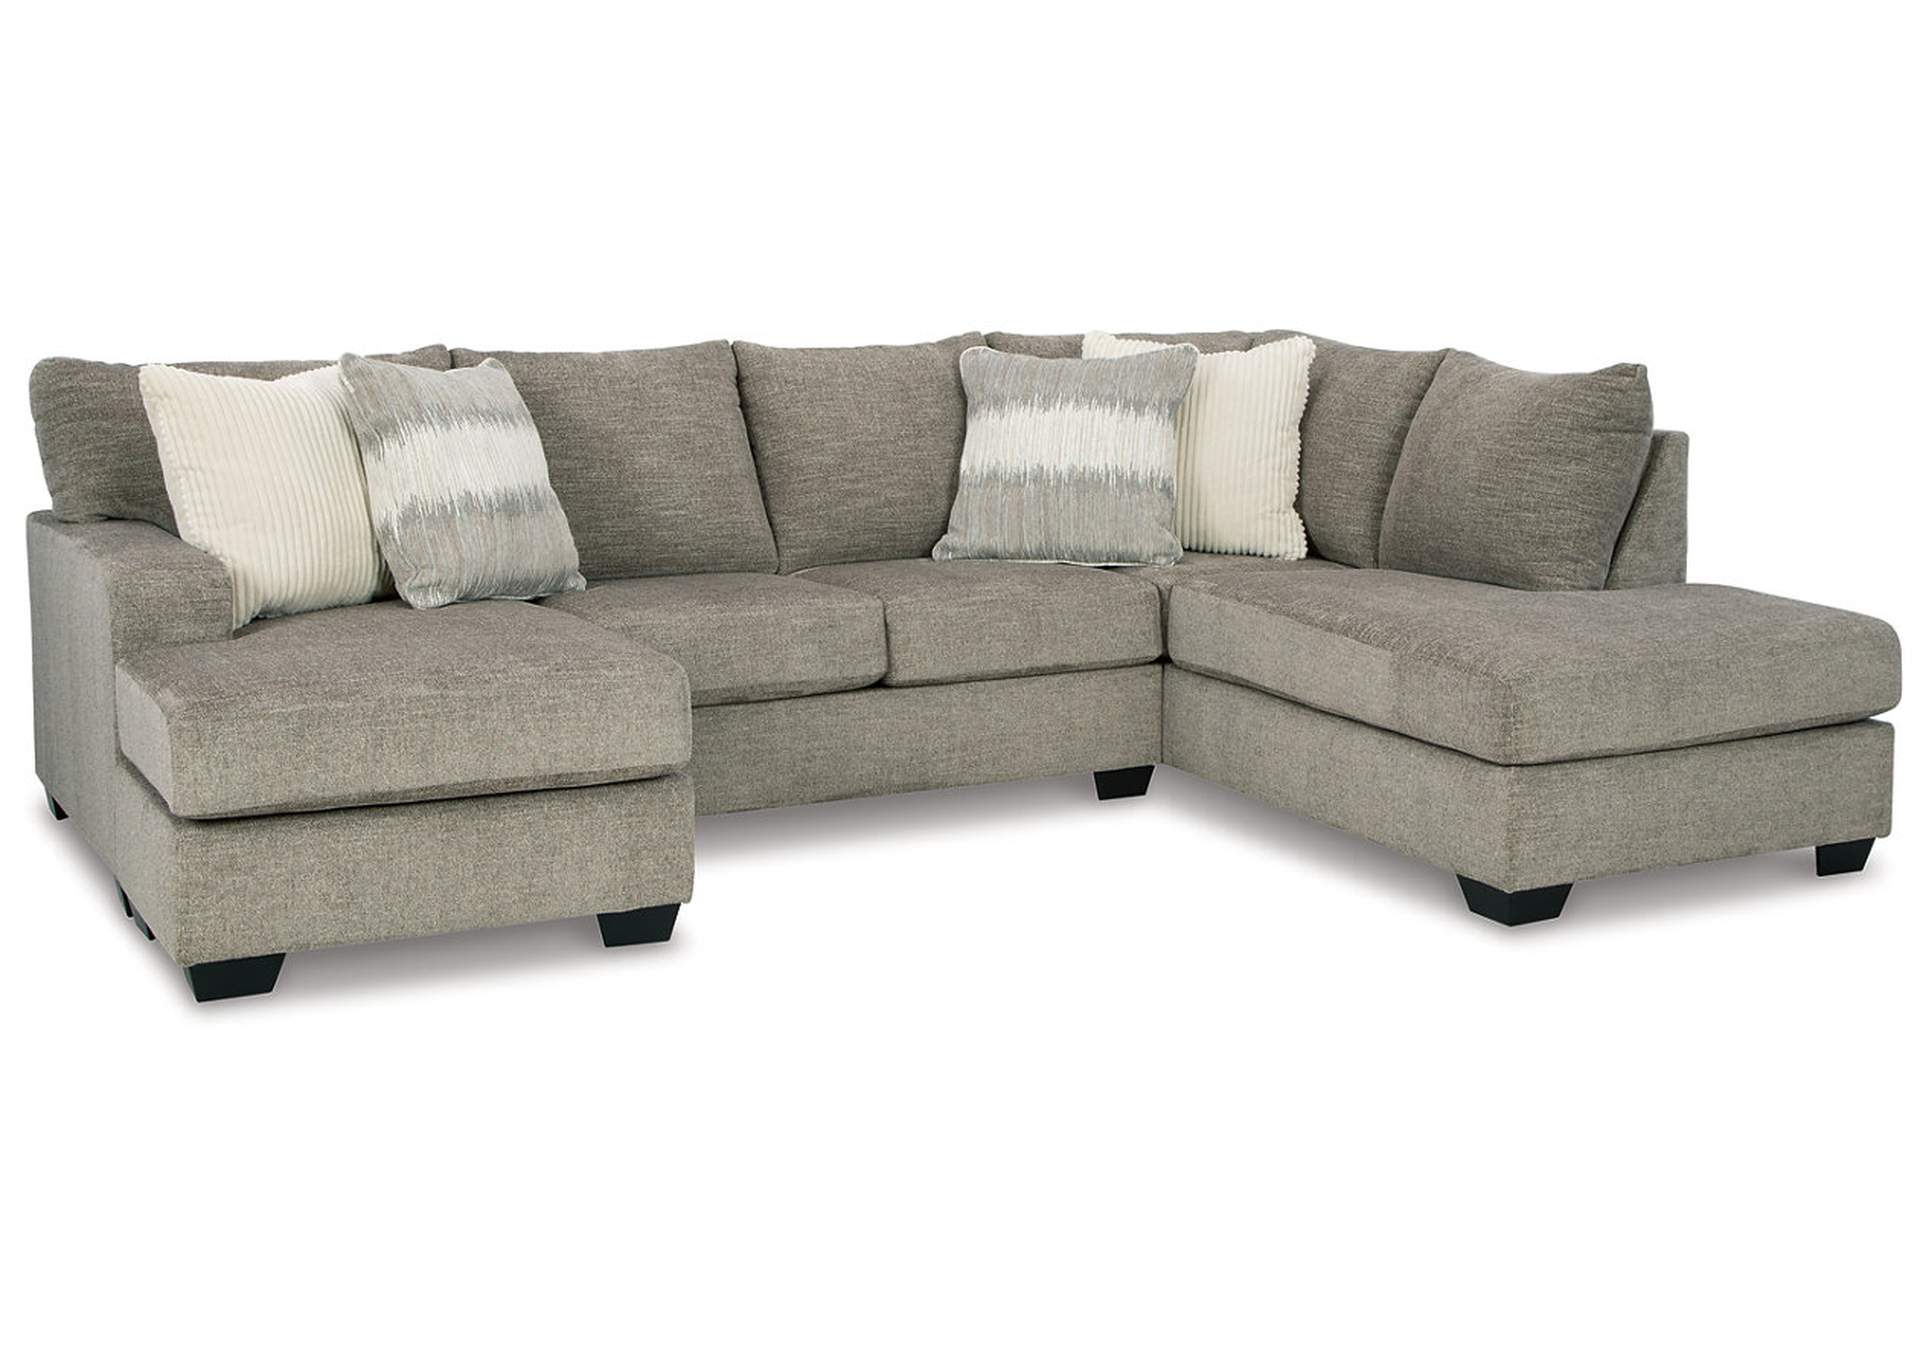 Creswell 2-Piece Sectional with Chaise,Signature Design By Ashley